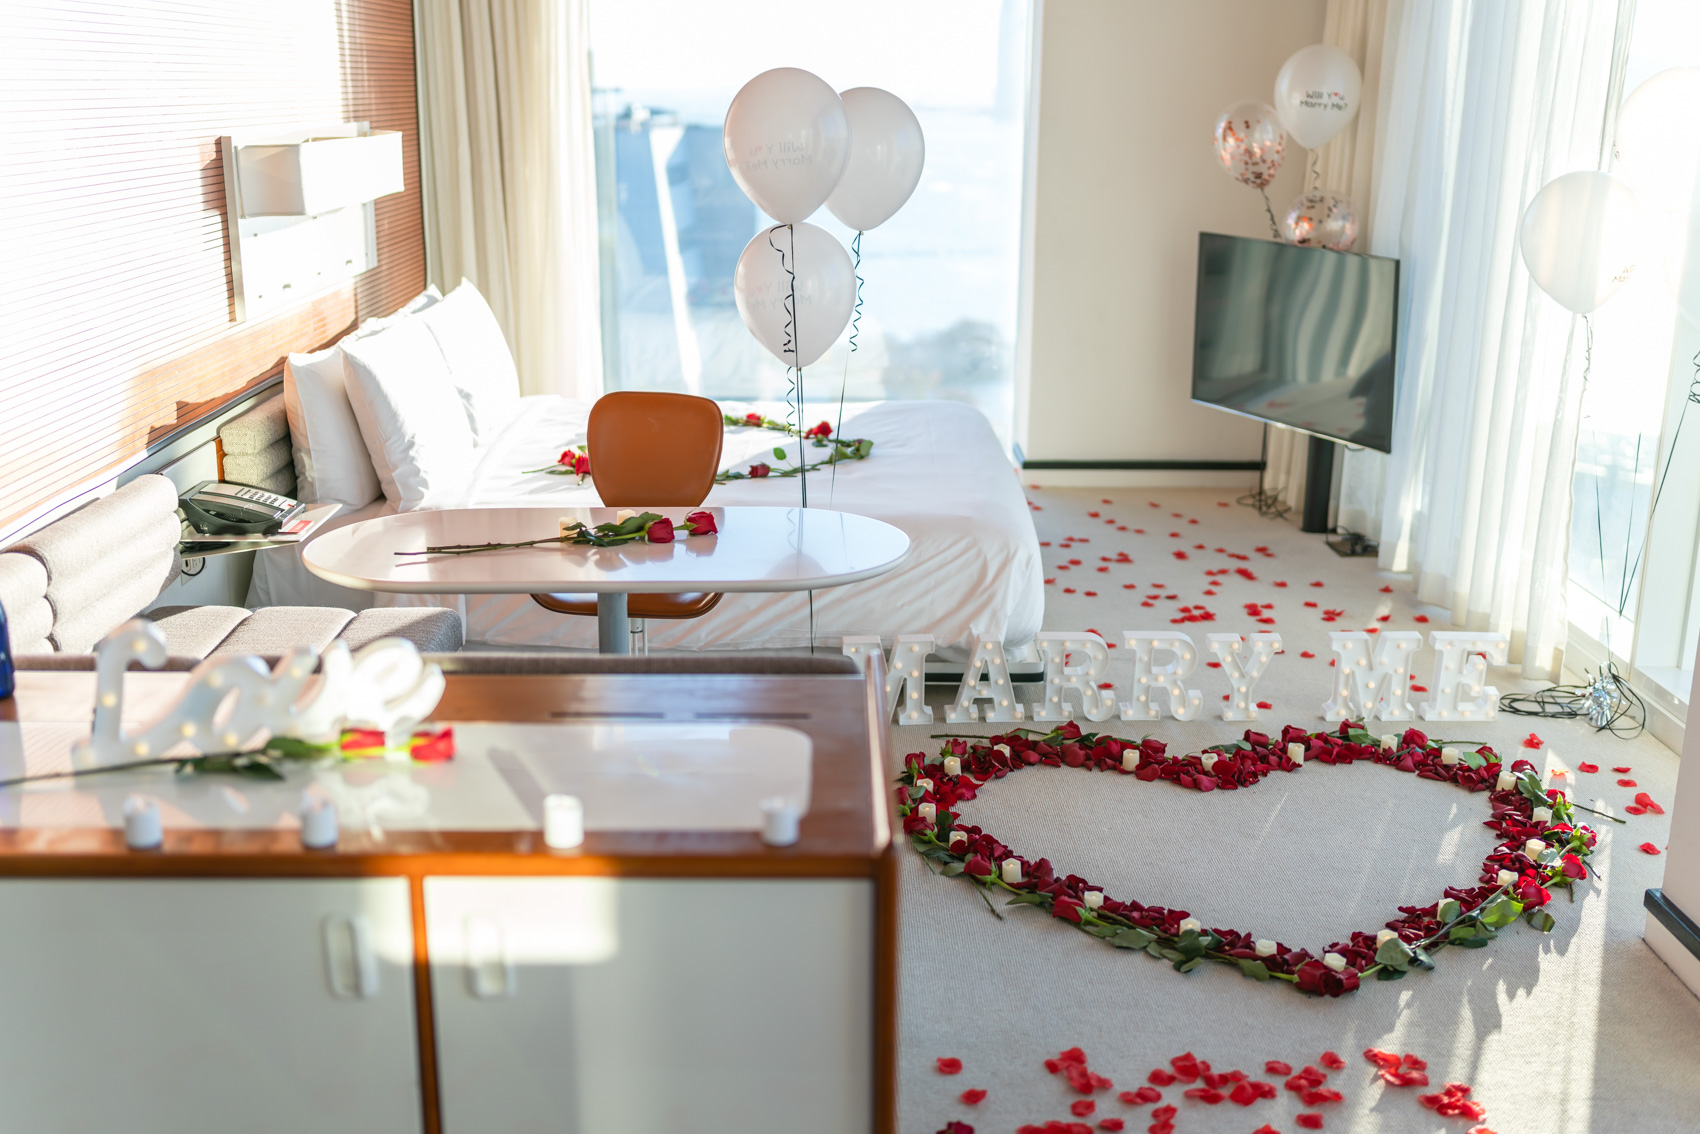 Hotel Room Makeover Proposal Ideas and Planning